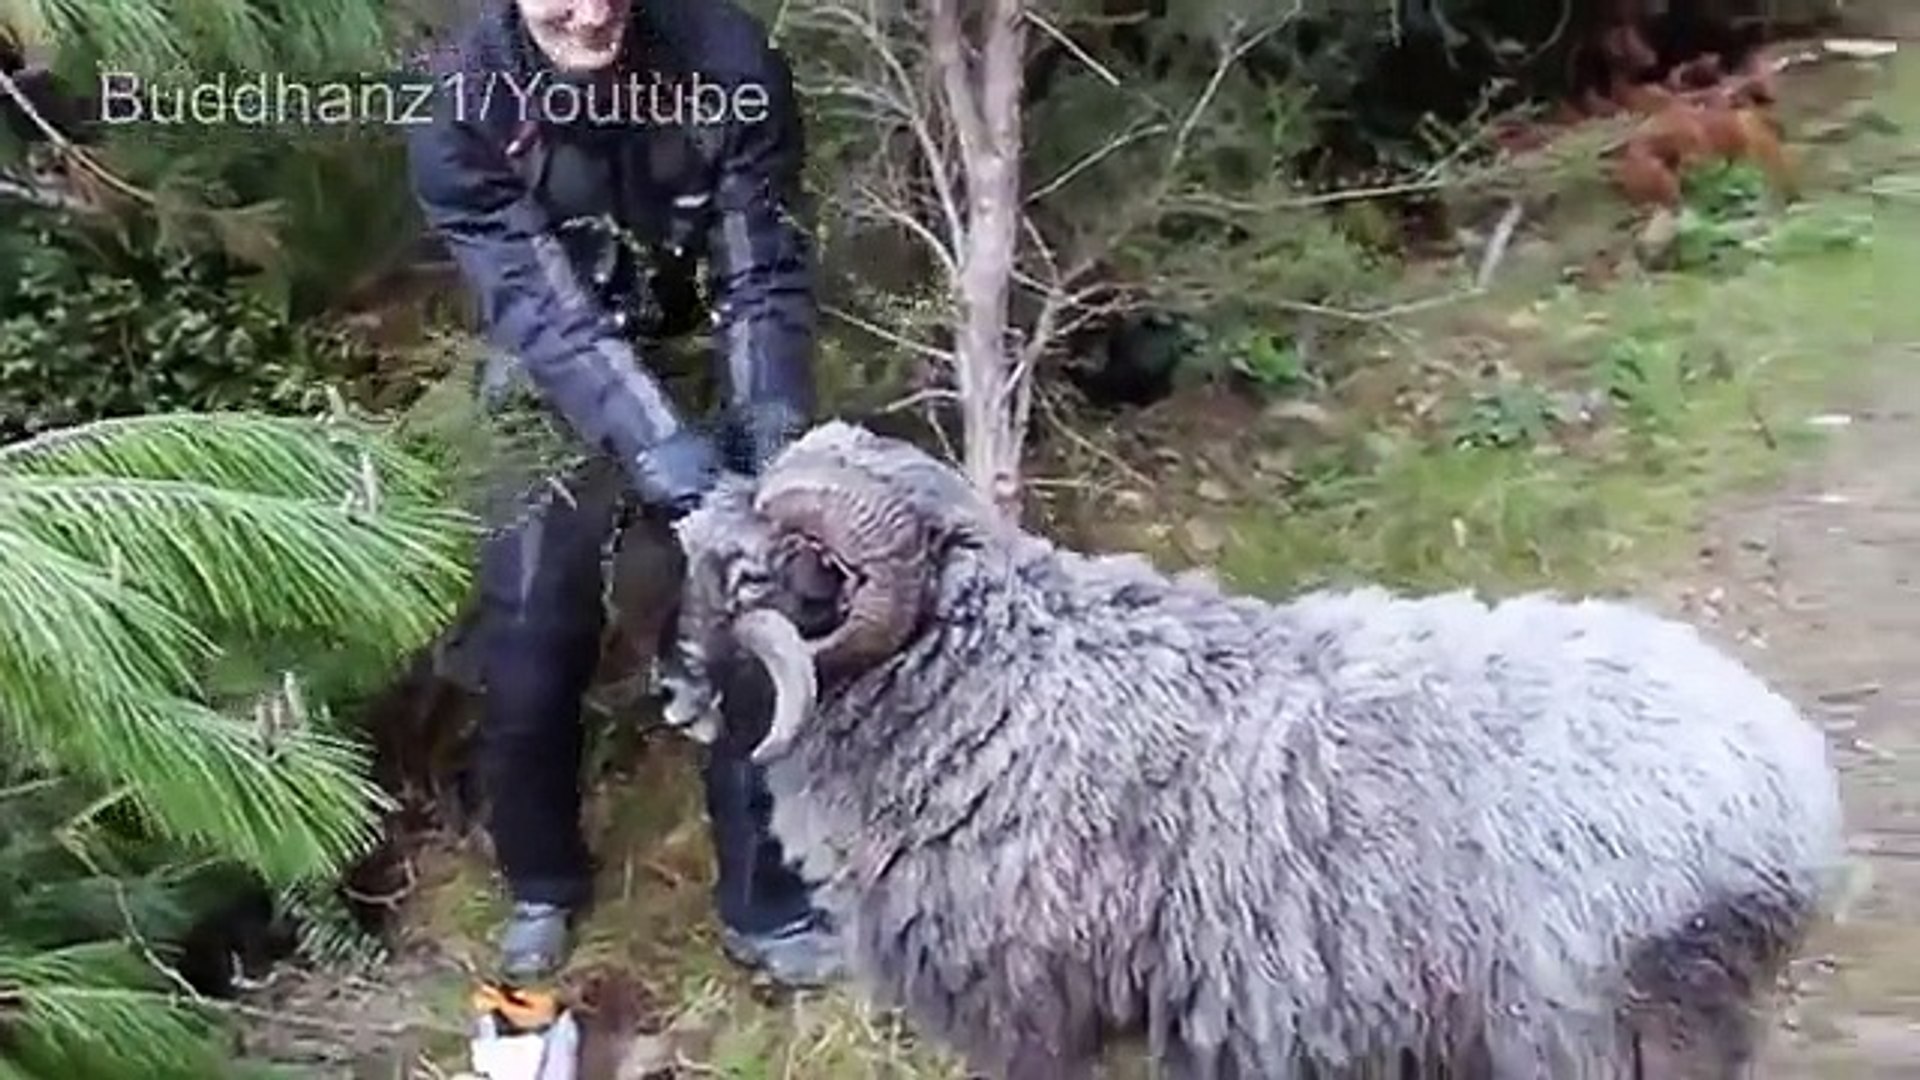 Wild sheep are attacked. Funny and dangerous sheep